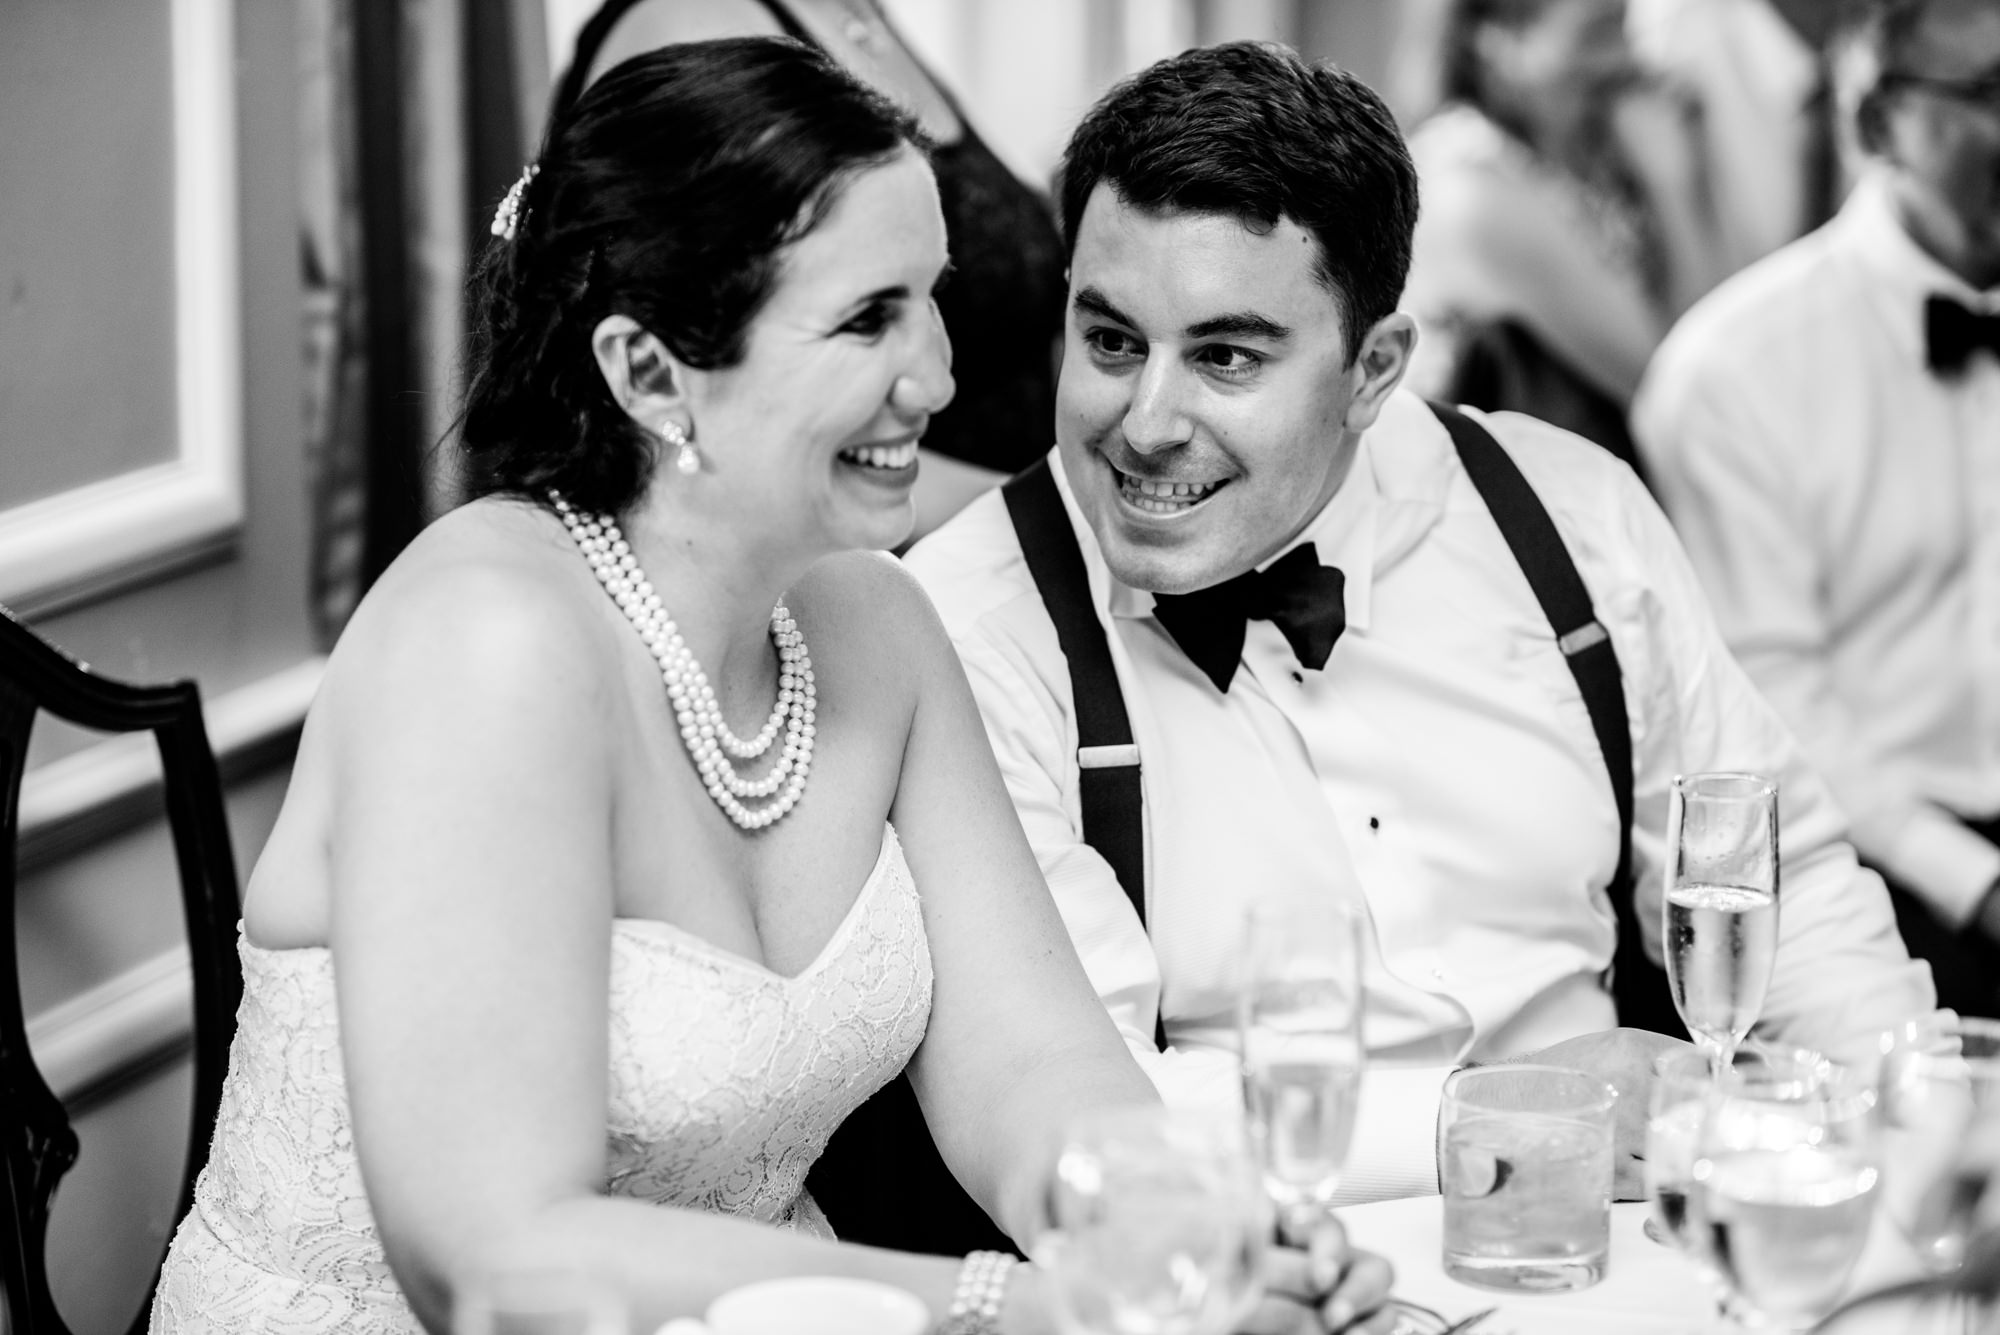 Ryan whispers "He NAILED it!" to Joelle regarding his younger brother's toast at their wedding reception at the Seattle Tennis Club, a wedding venue in Seattle, WA. Summer 2016. Photo by Seattle Wedding Photographers Jennifer Tai Photo Artistry.